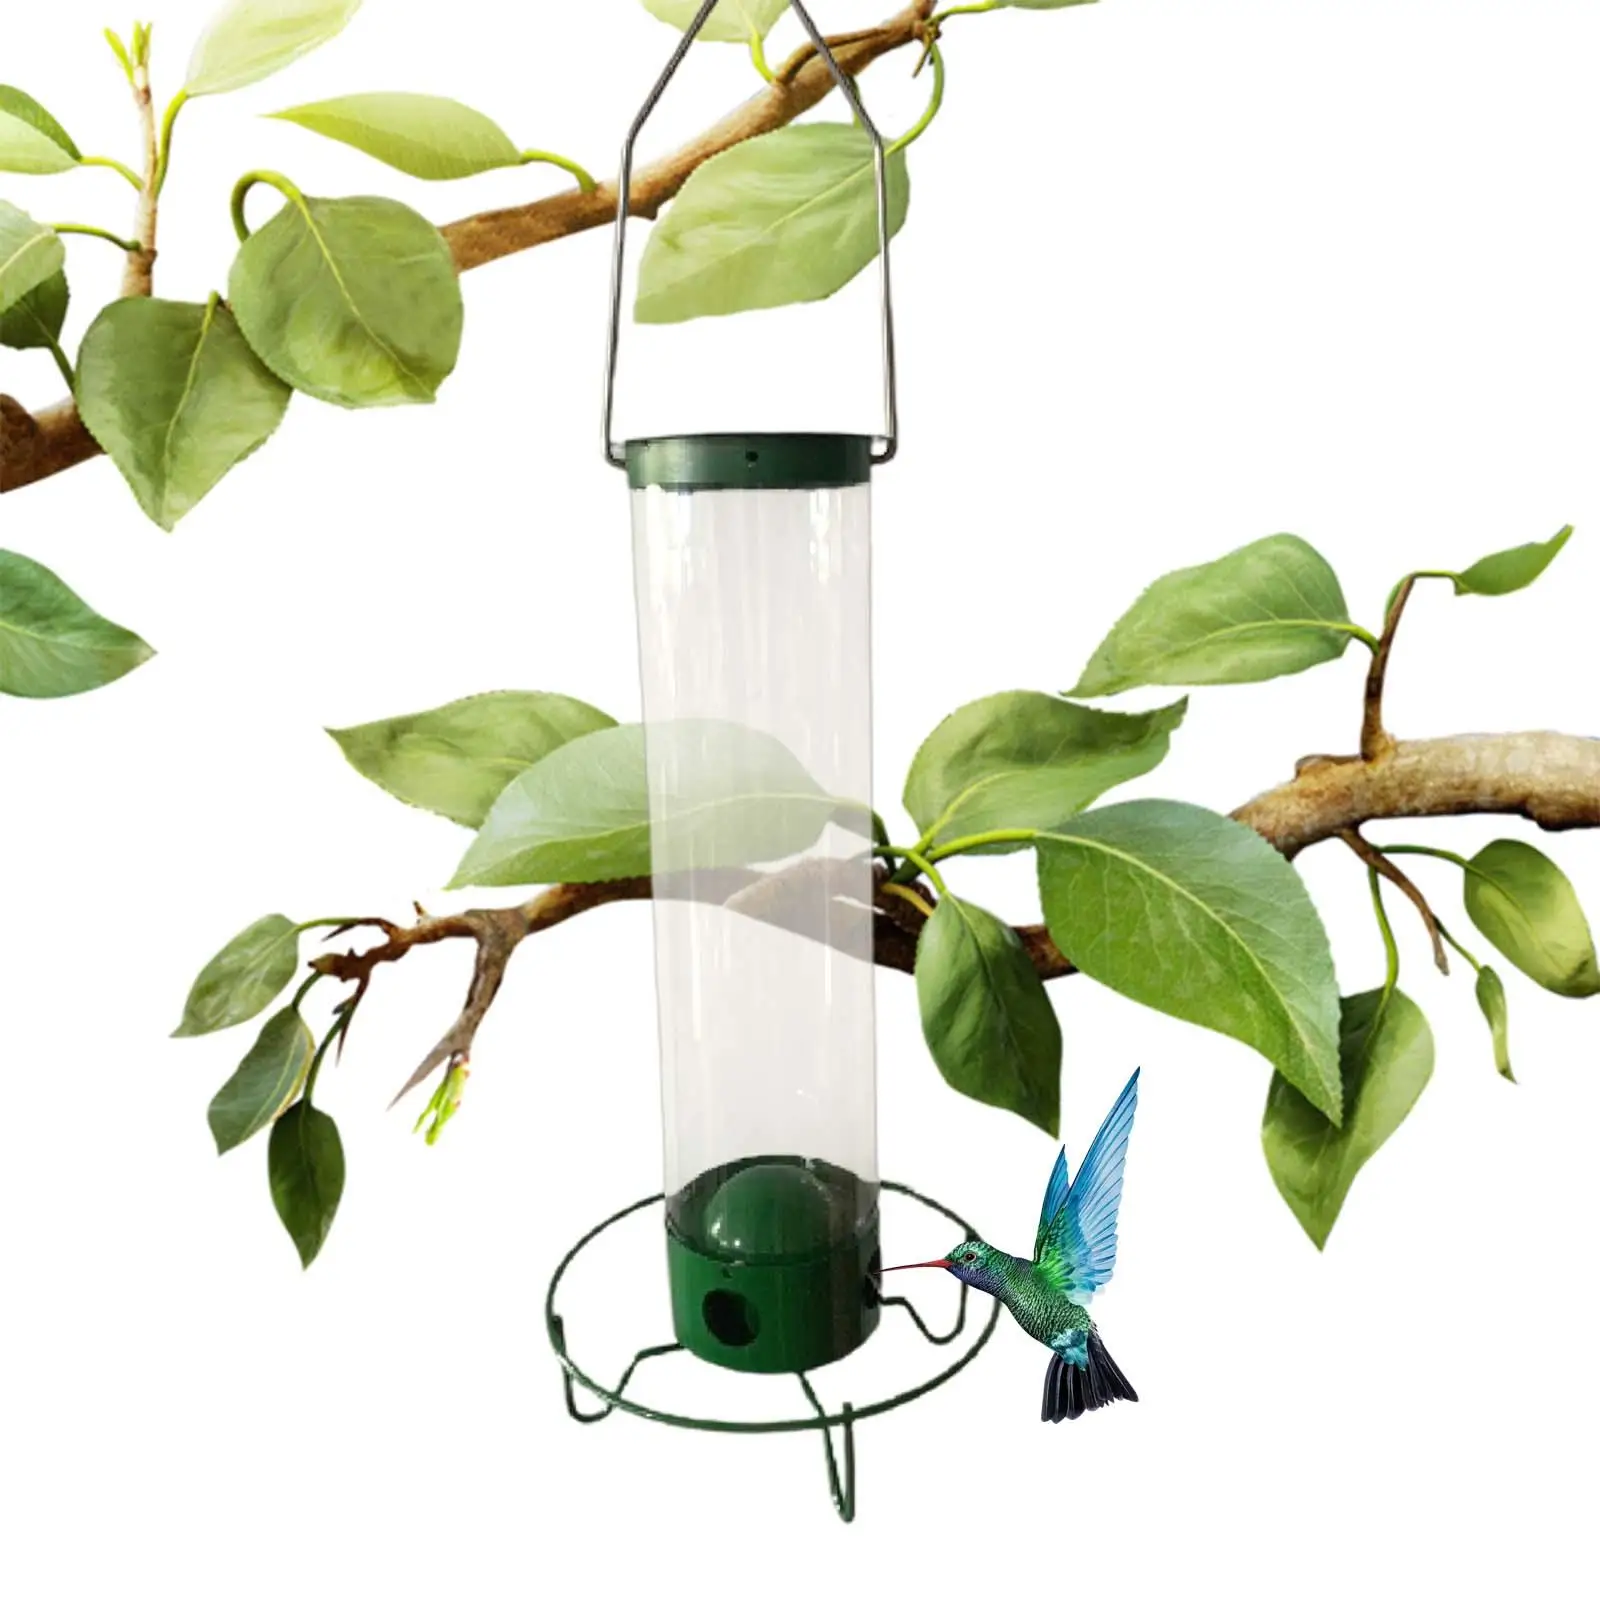 Bird Feeder Garden Decoration with Four Feeding Ports with Hanging Hook Automatic Bird Feeder for Bird Watchers Gift Outside